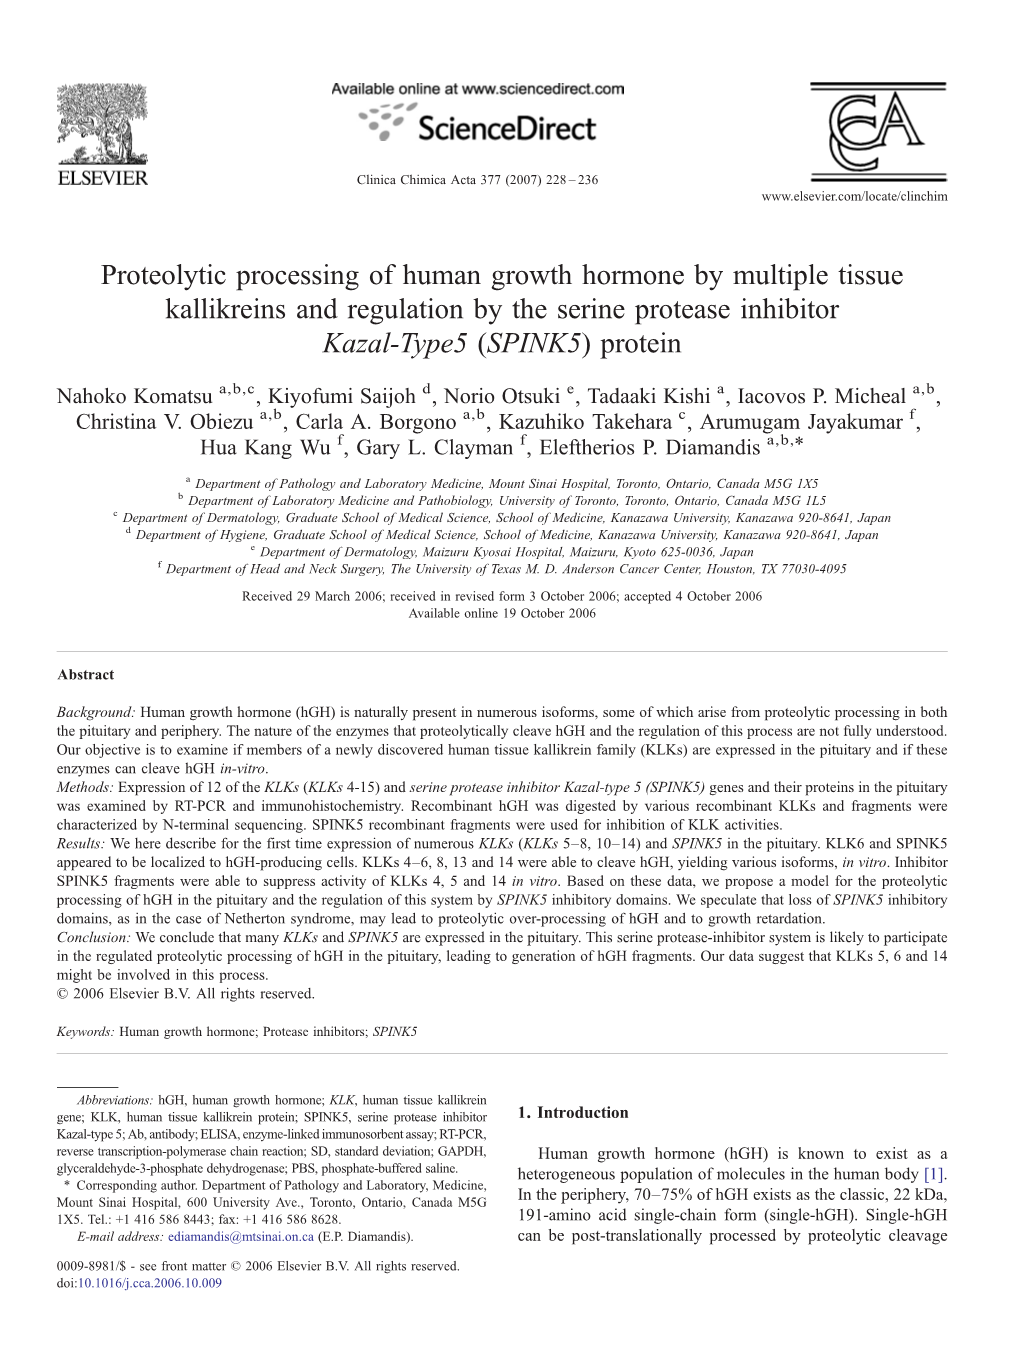 Proteolytic Processing of Human Growth Hormone by Multiple Tissue Kallikreins and Regulation by the Serine Protease Inhibitor Kazal-Type5 (SPINK5) Protein